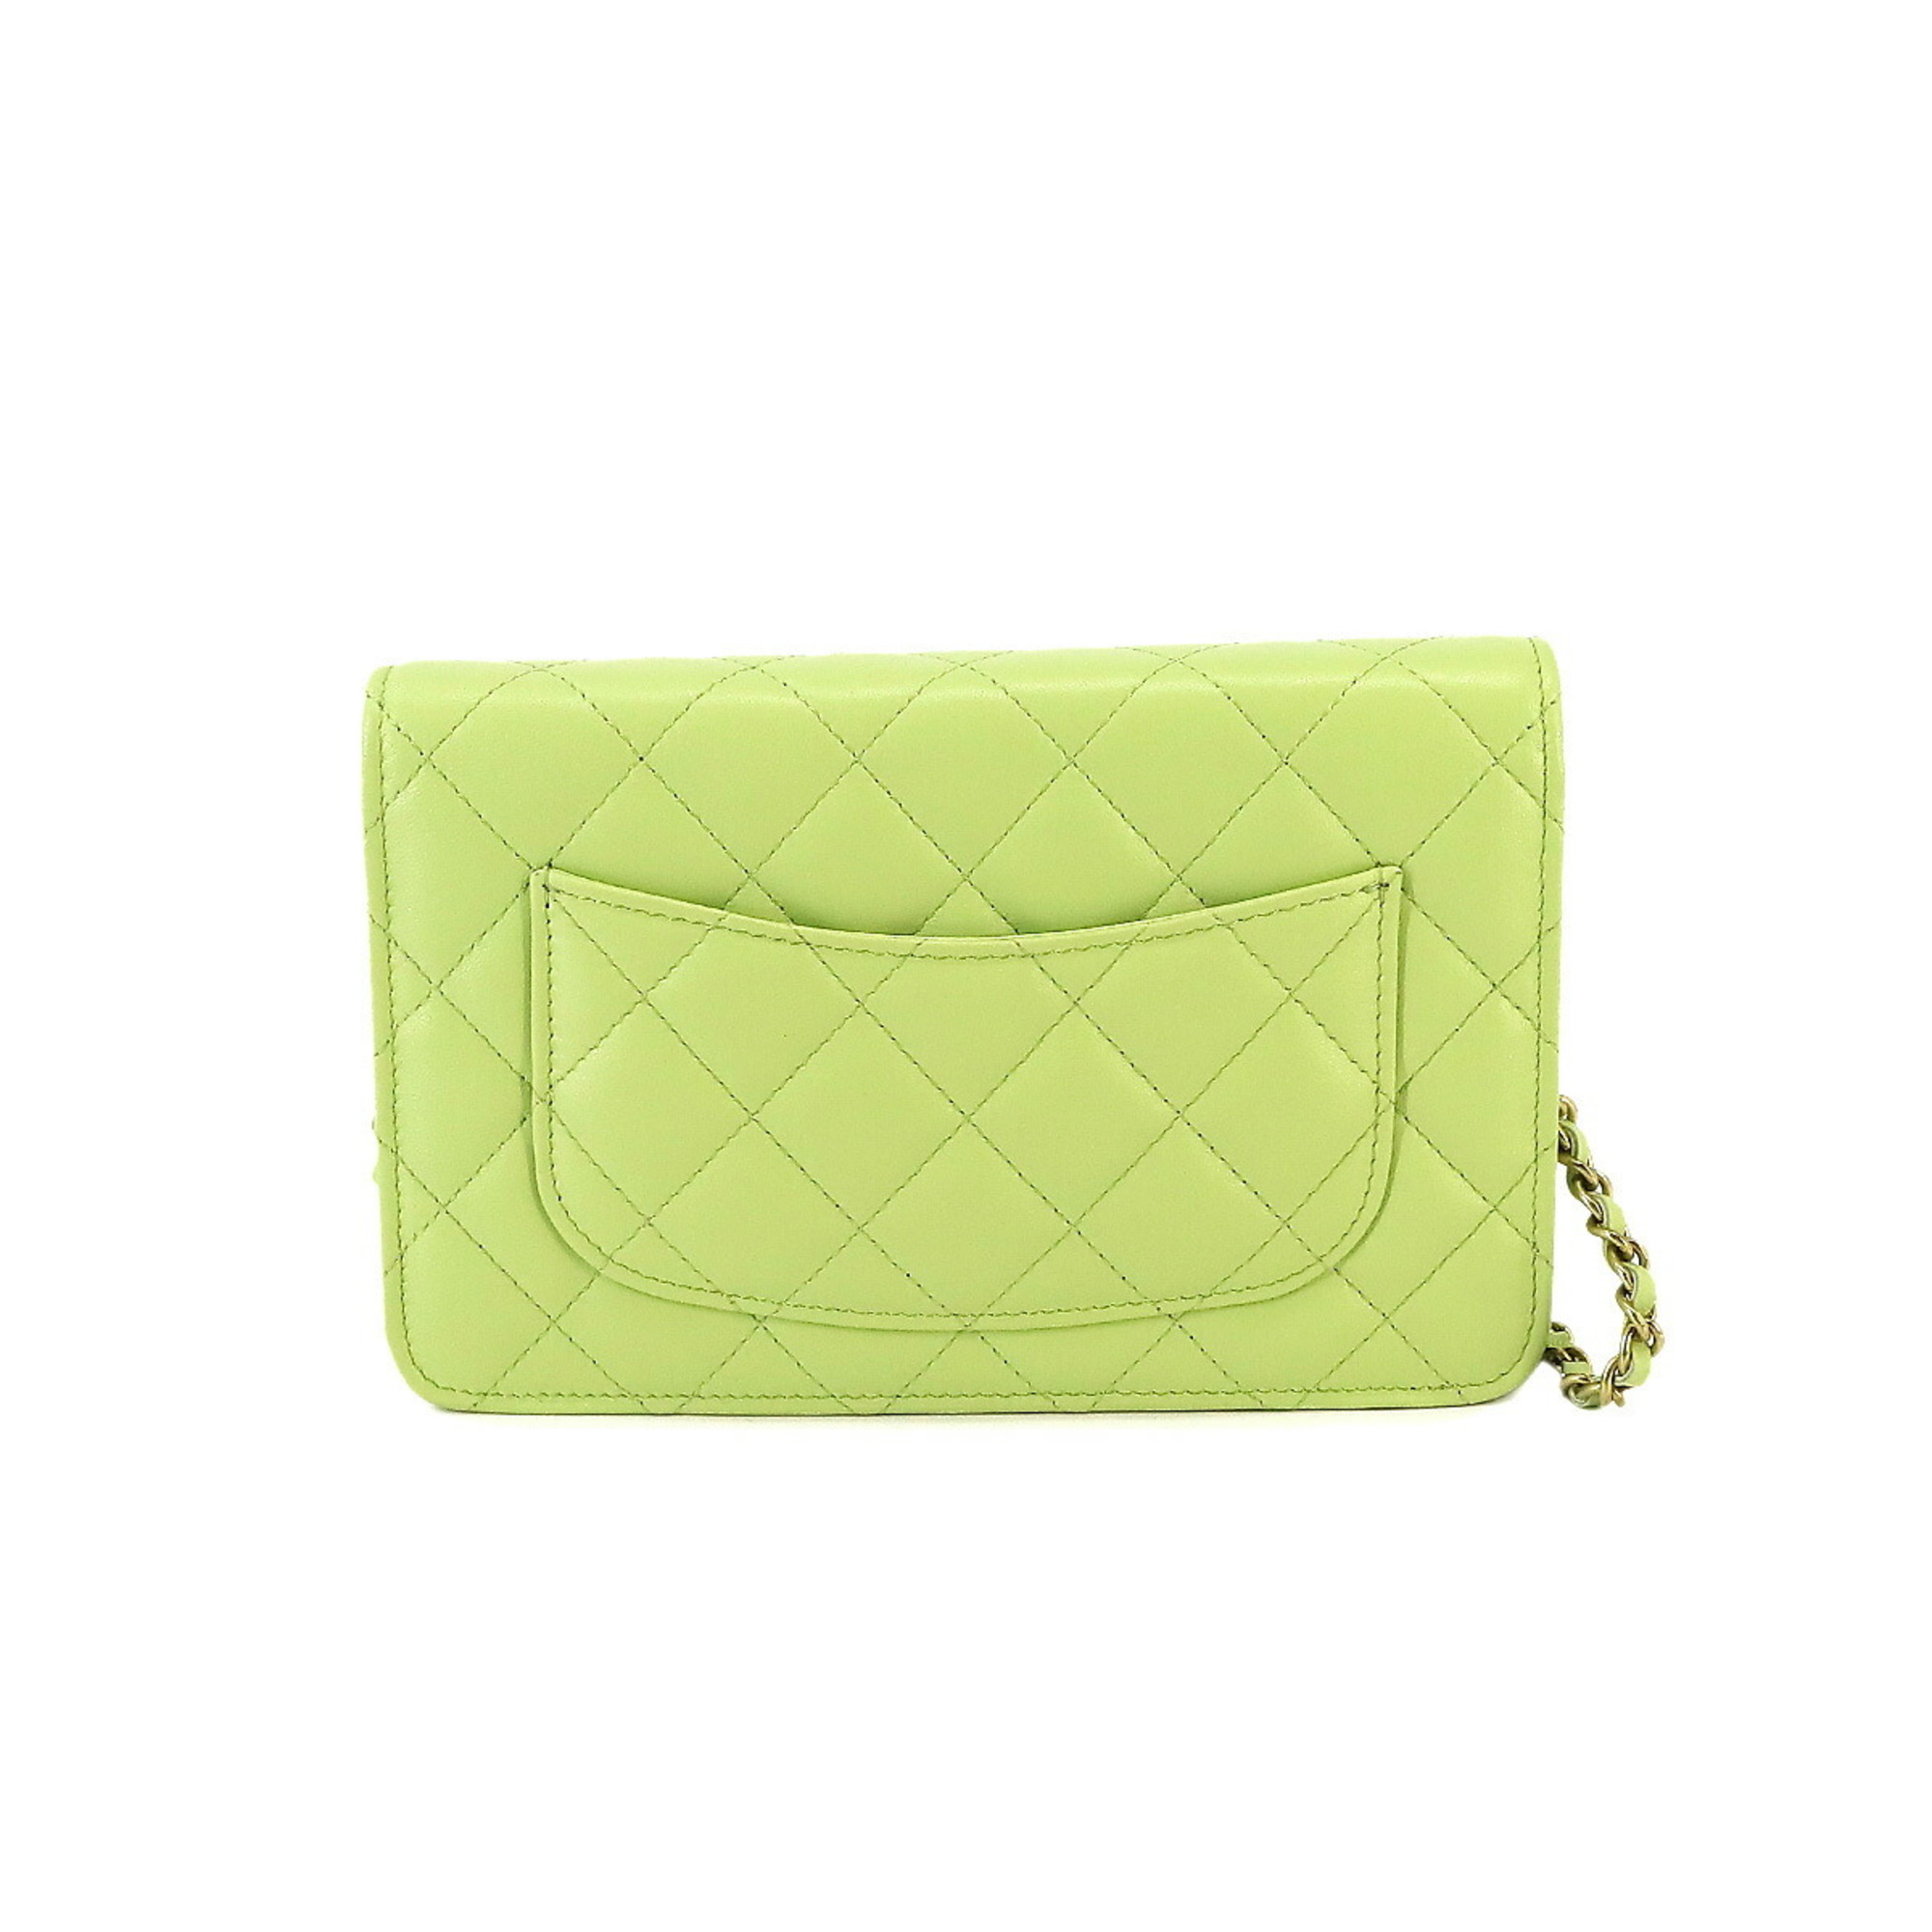 CHANEL Matelasse Classic Chain Wallet Long Leather Light Green AP0250 Gold Hardware